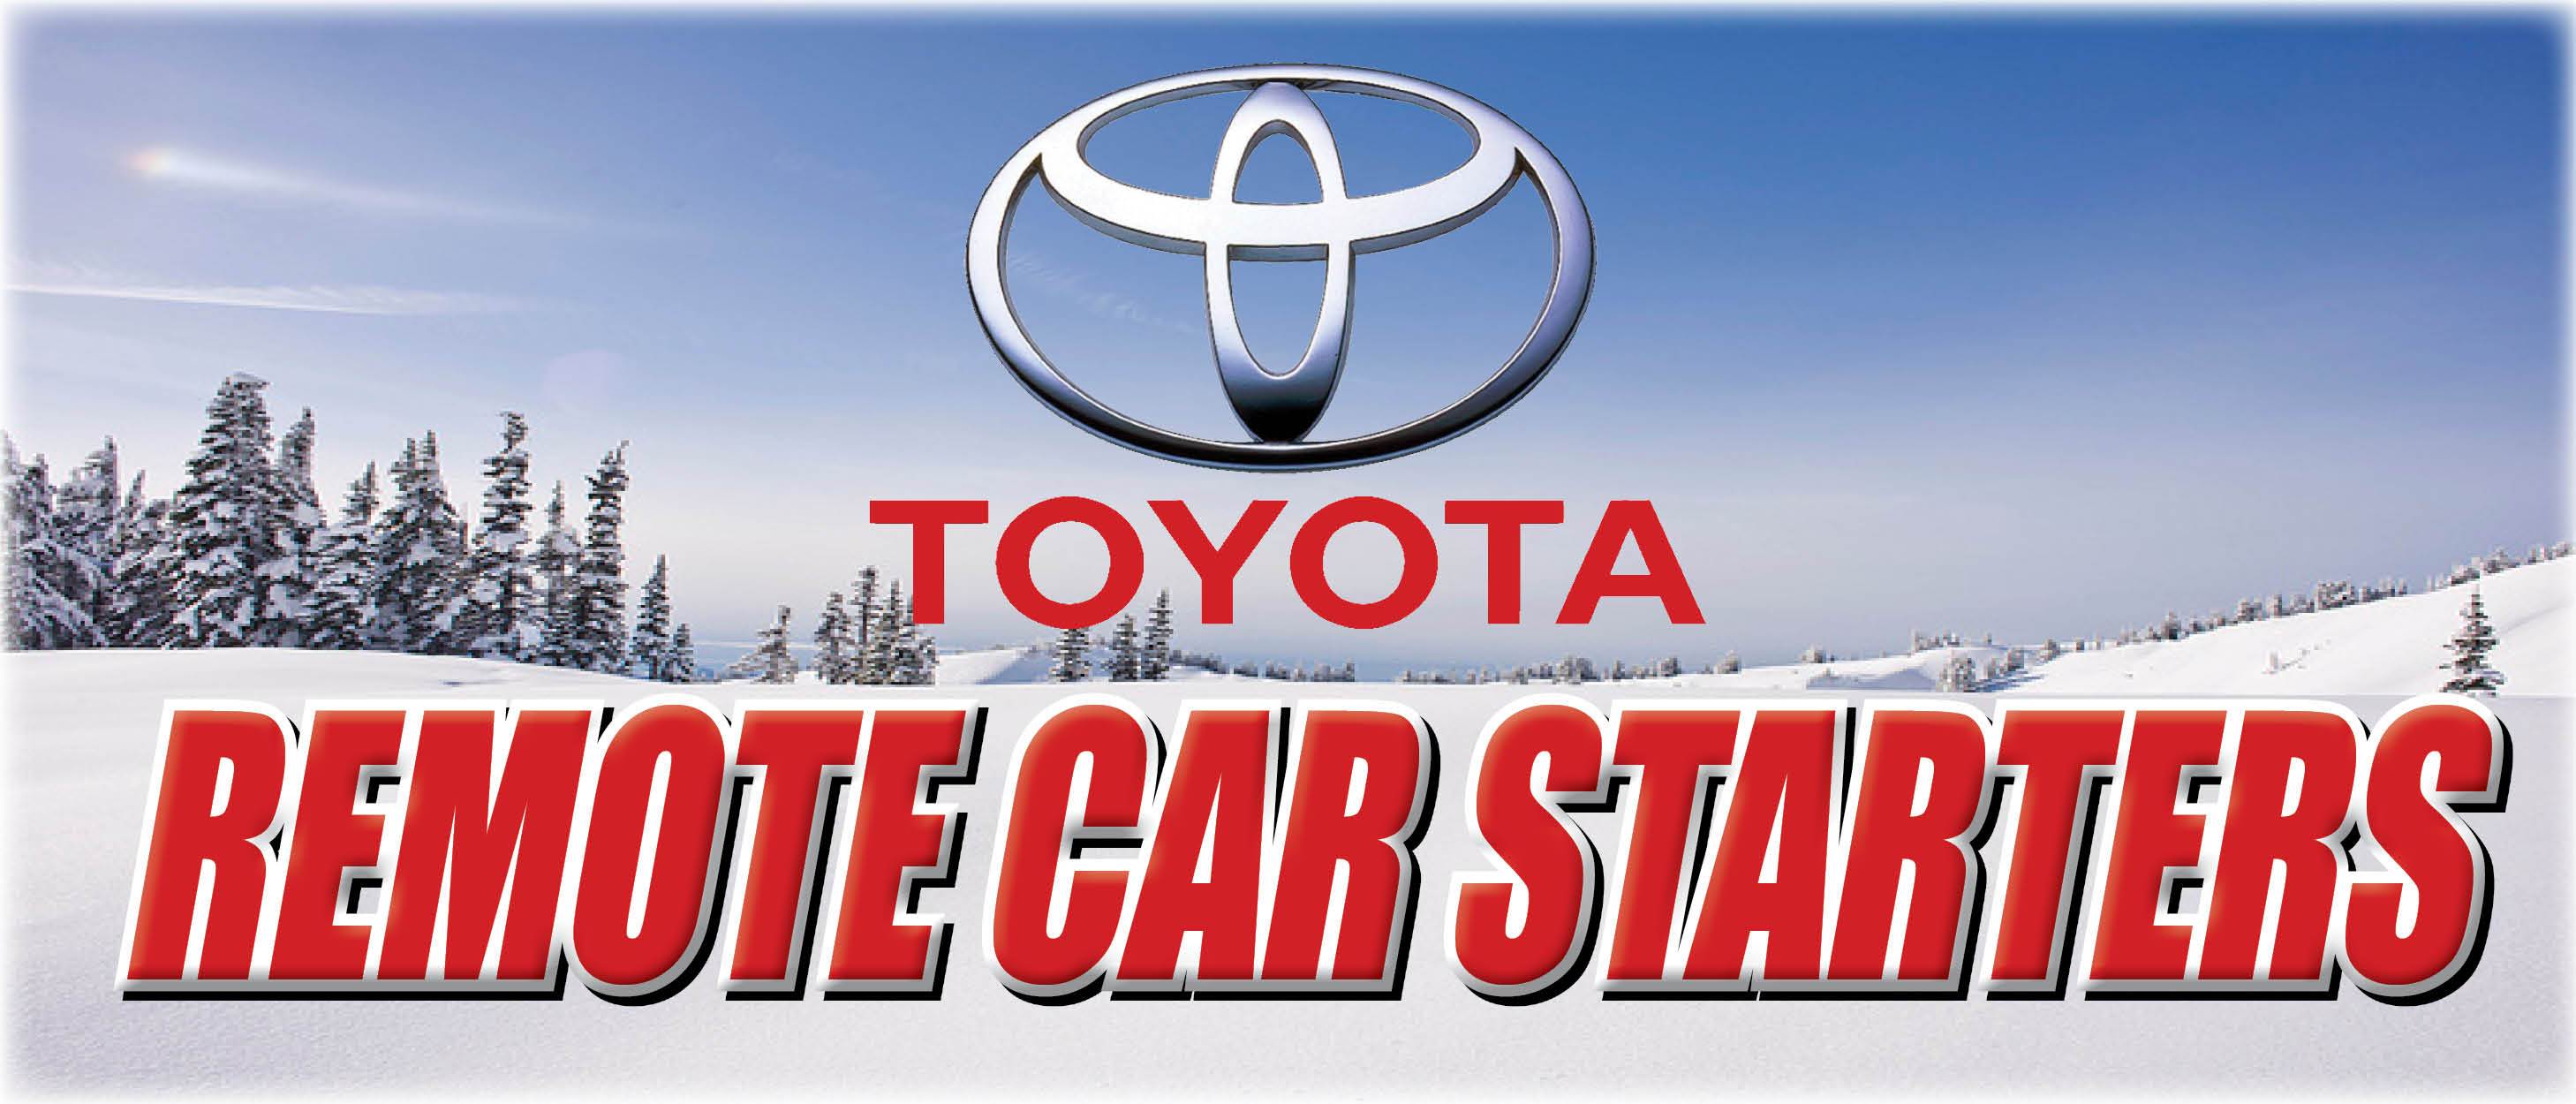 Toyota Remote Car Starters New Hampshire